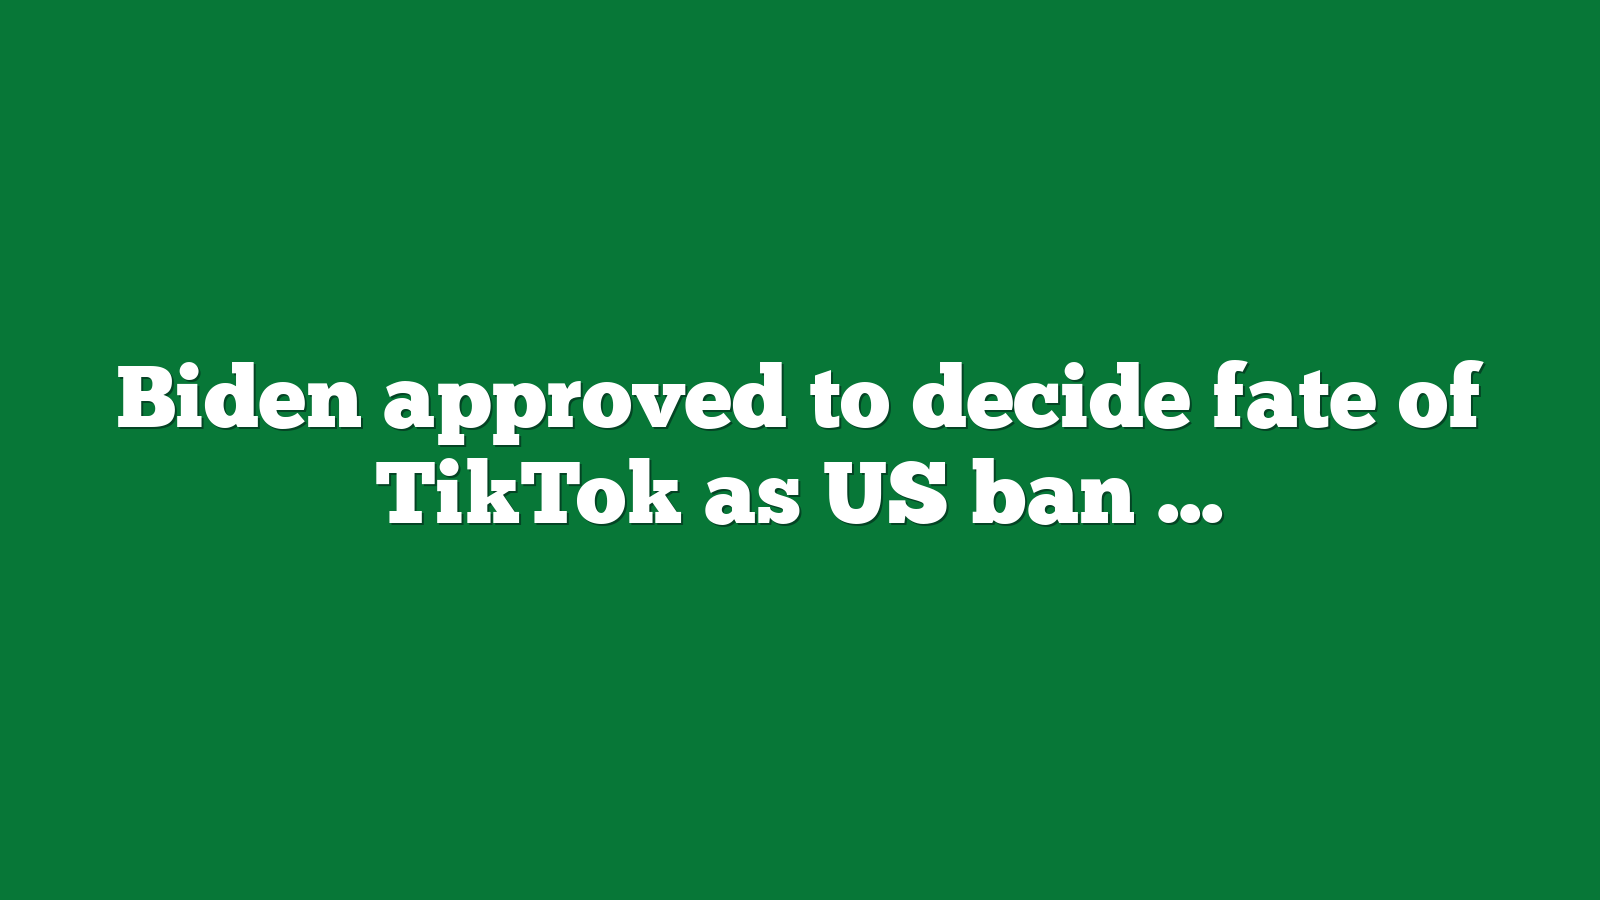 Biden approved to decide fate of TikTok as US ban nears